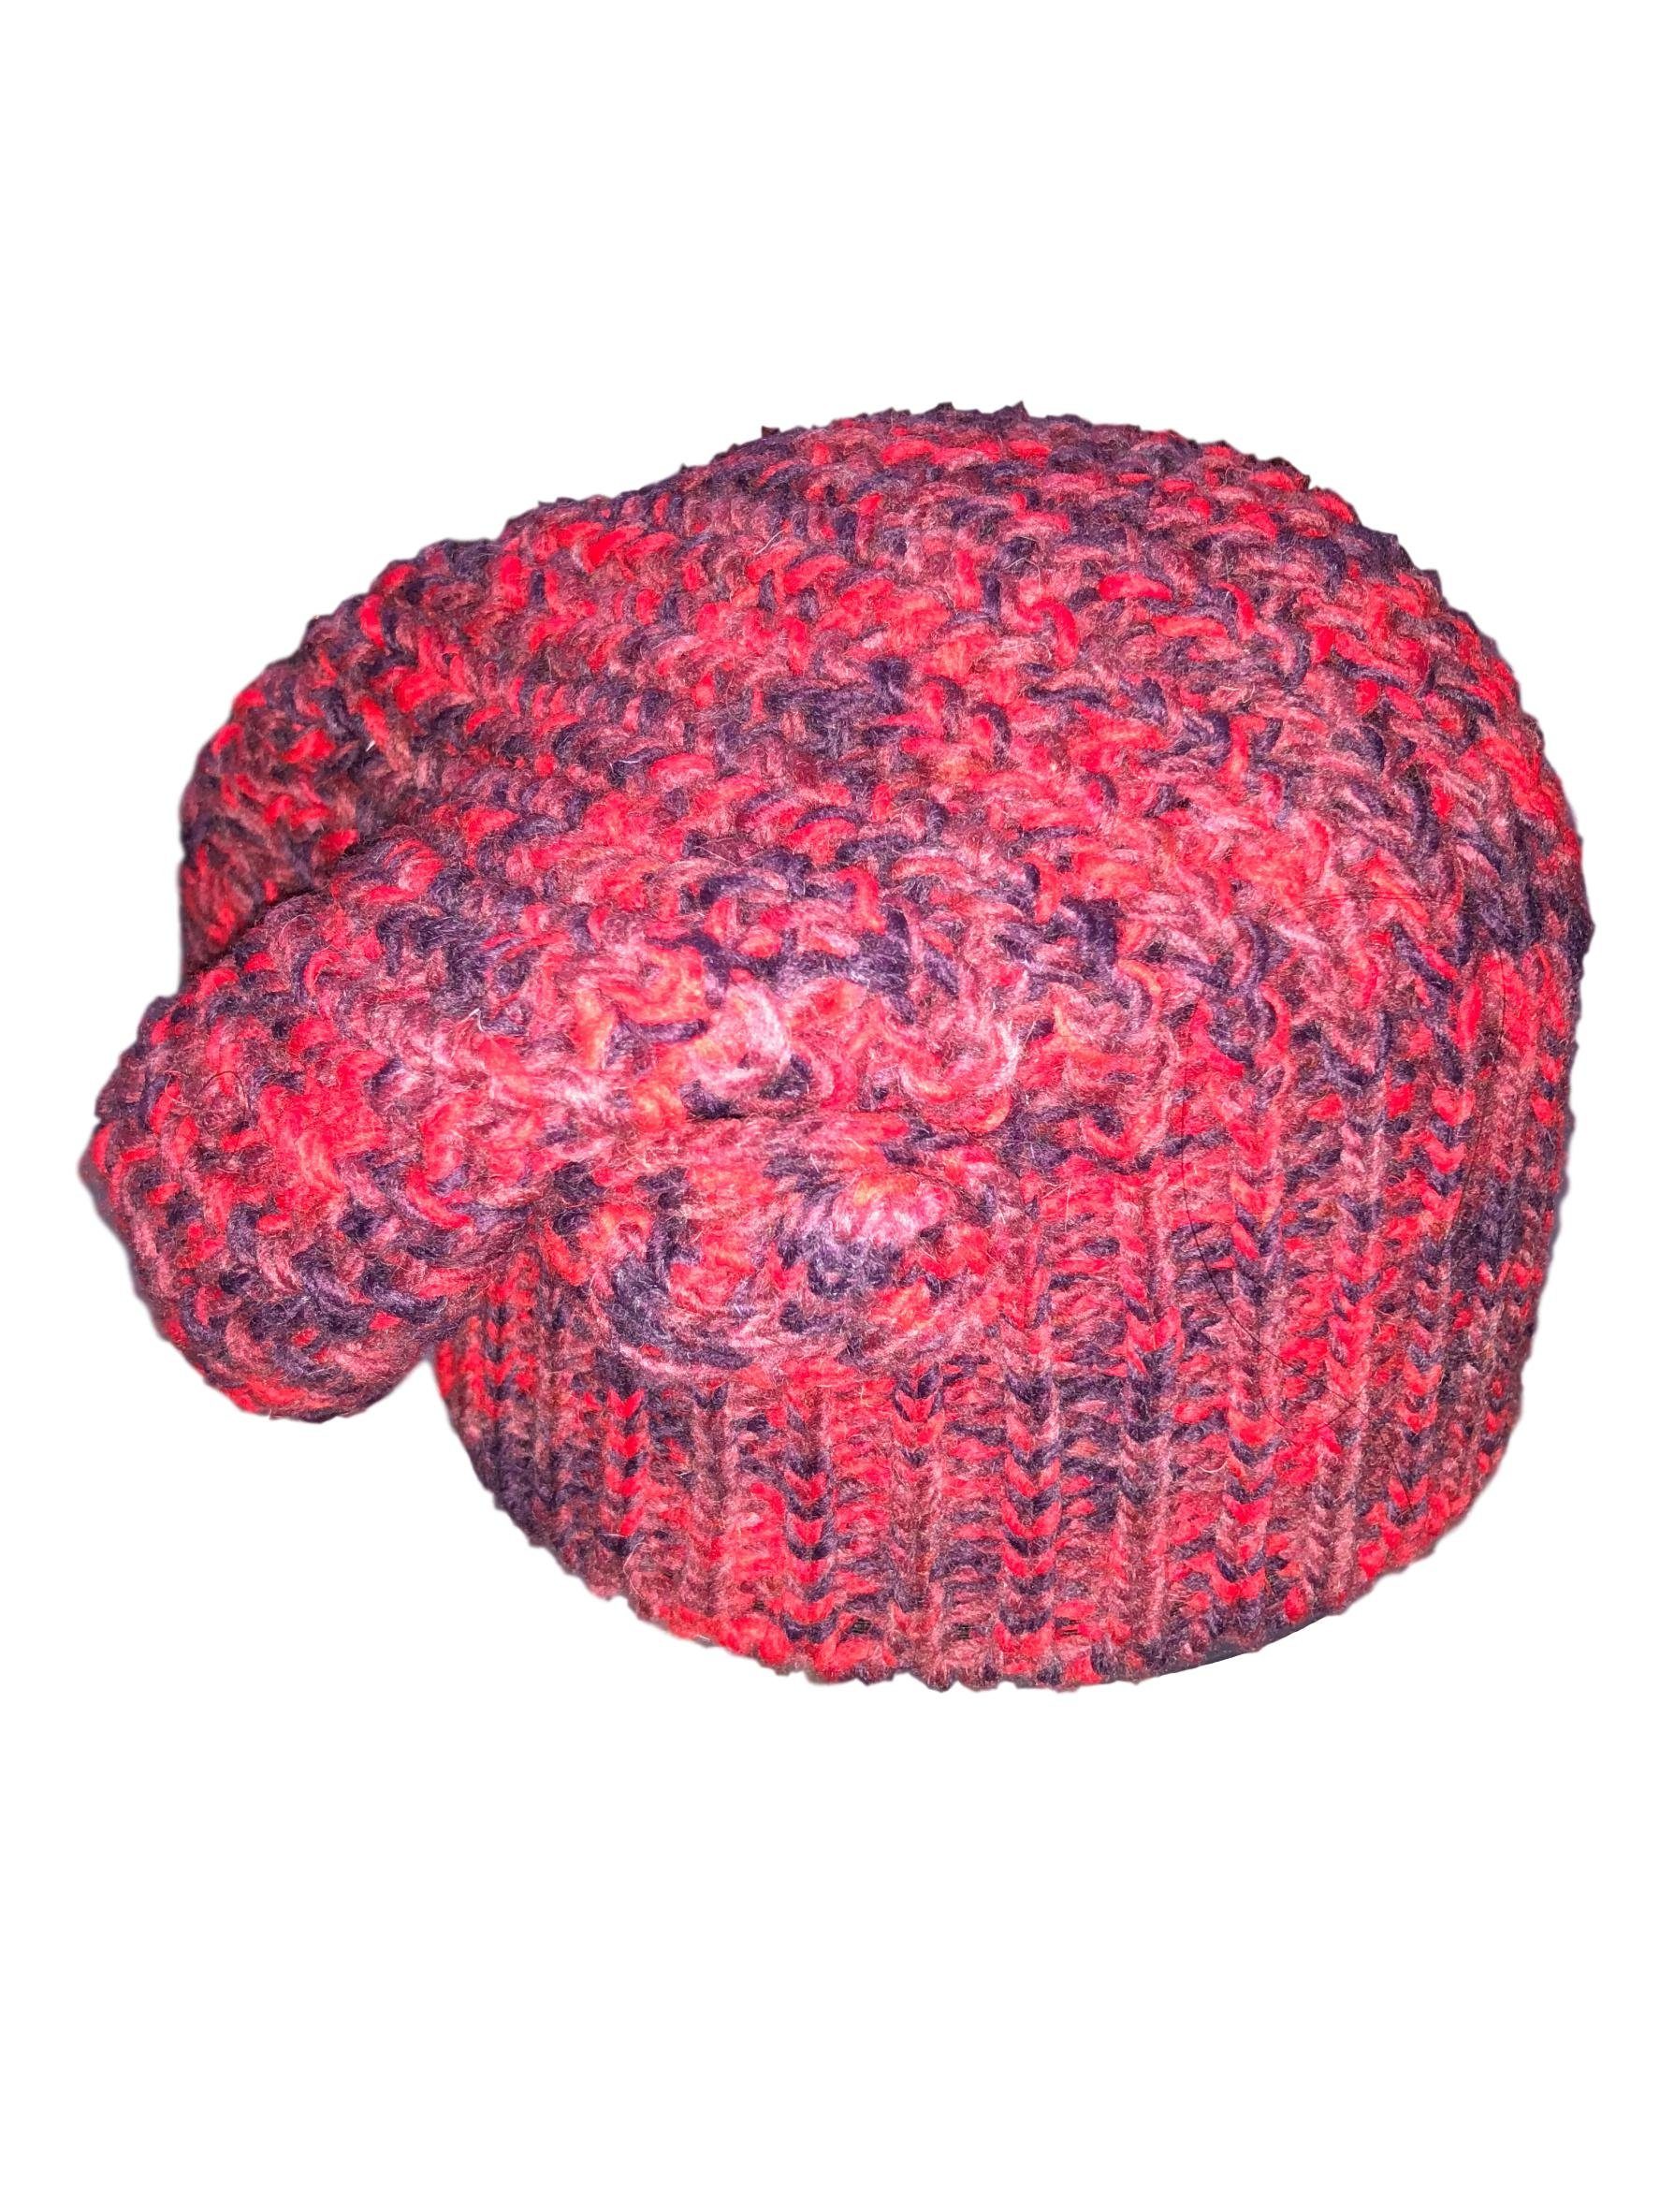 Mayser Strickmütze Mayser Mütze Strickmütze mit Blume rot Slouch